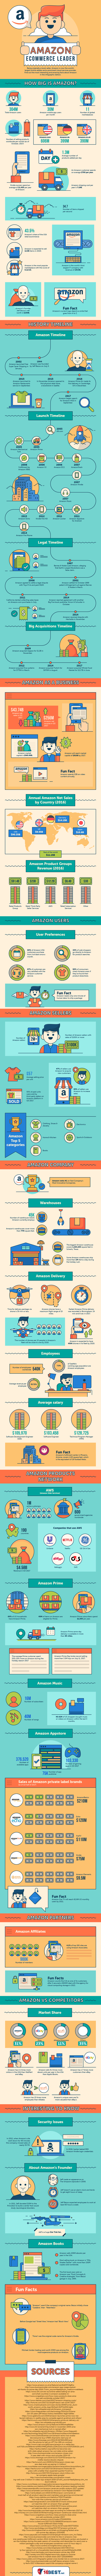 All About Amazon - The eCommerce Leader (Infographic)